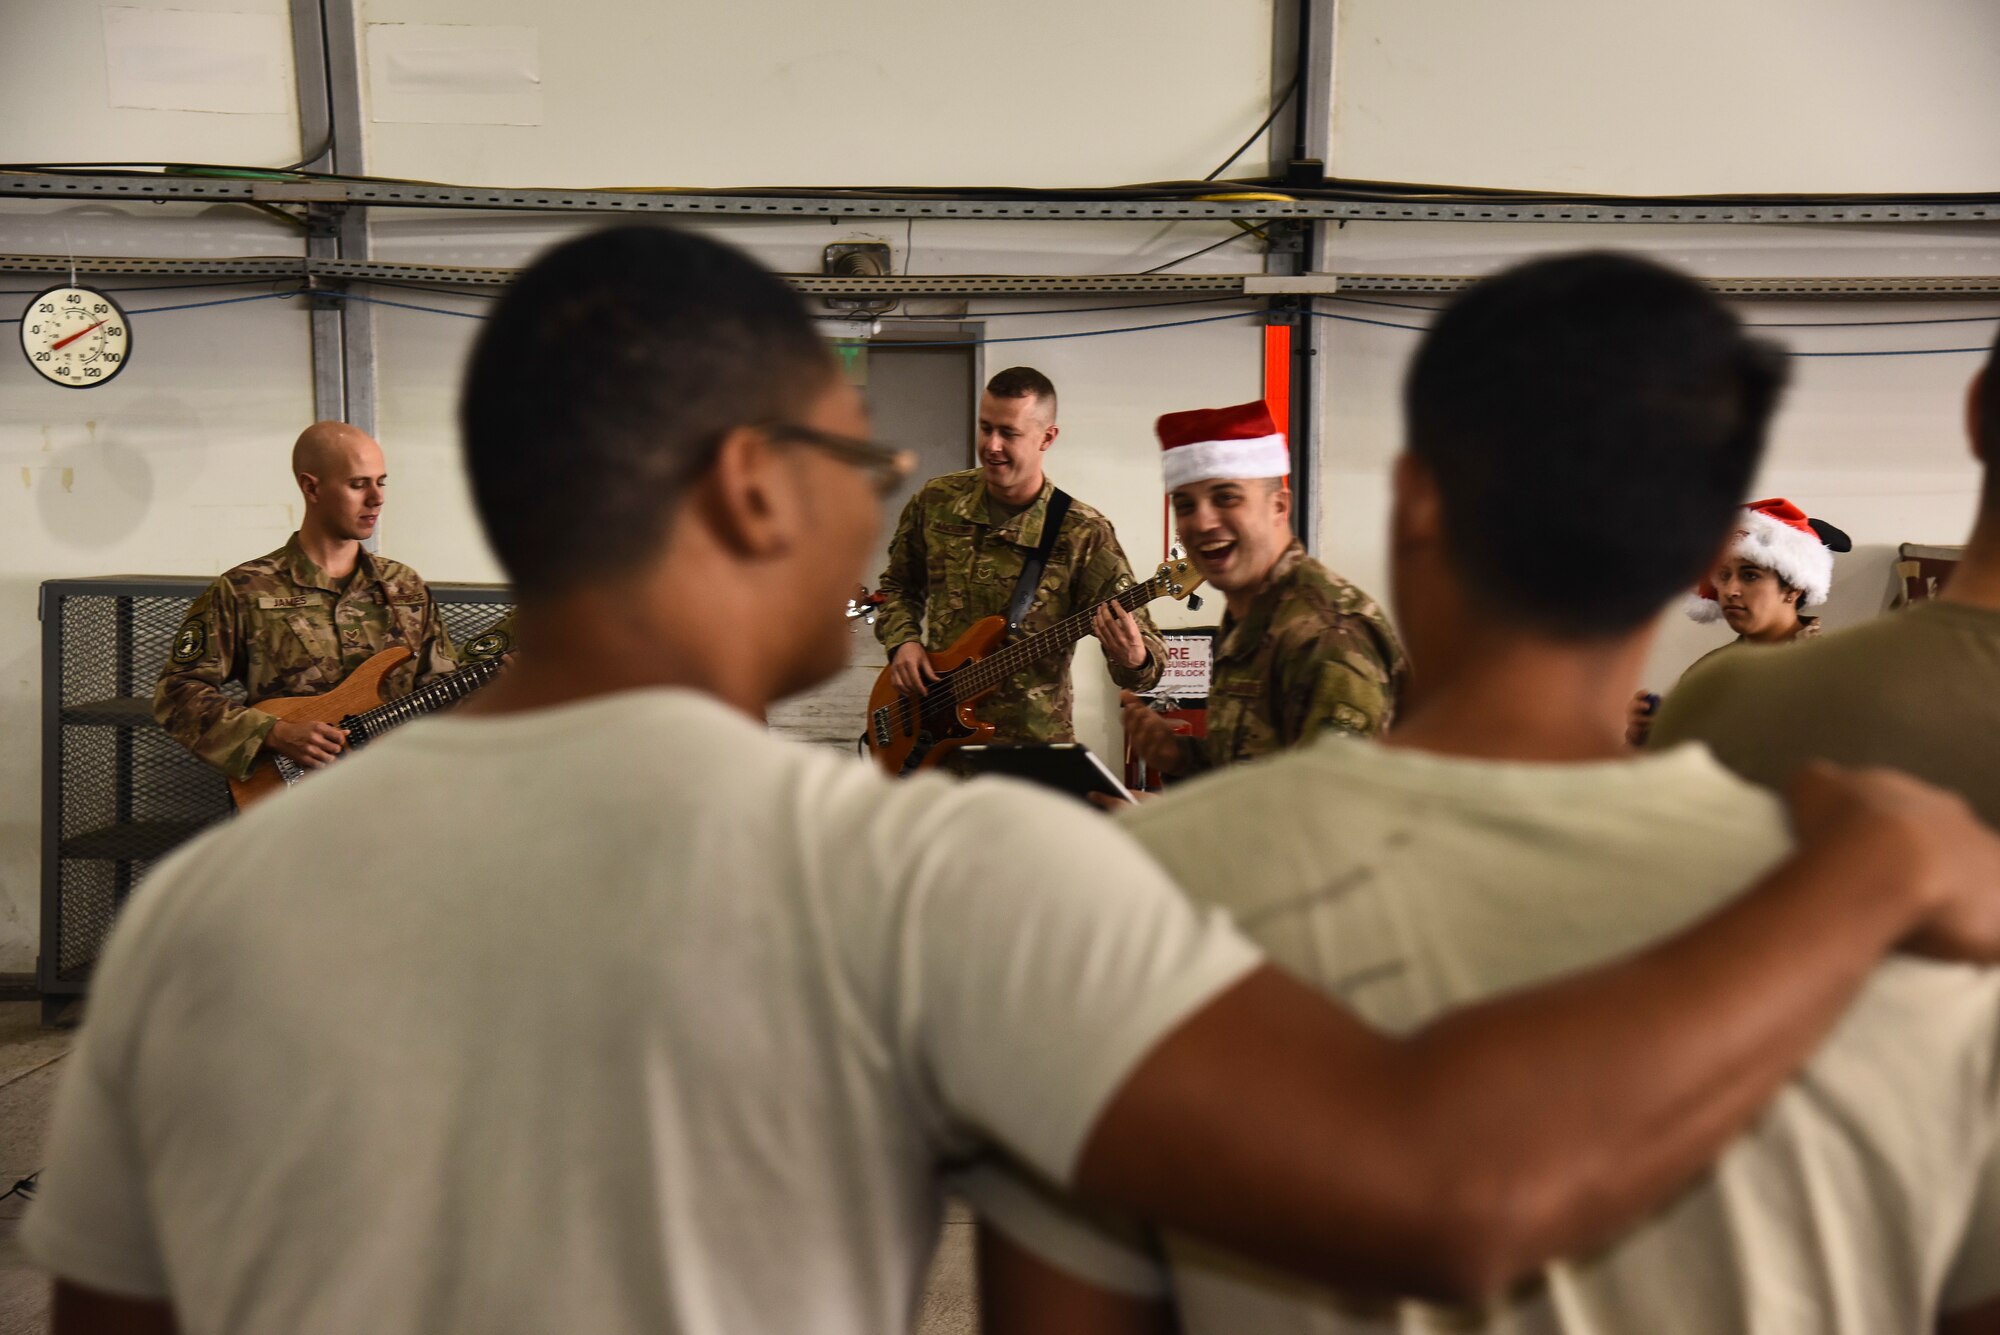 The U.S. Air Forces Central Command Band performs for Airmen assigned to the 380th Expeditionary Maintenance Group at Al Dhafra Air Base, United Arab Emirates, Dec. 4, 2018. The AFCENT Band rotates several ensembles through the area of responsibility that perform a wide variety of musical styles to appeal to audiences of all ages and backgrounds. (U.S. Air Force photo by Senior Airman Mya M. Crosby)